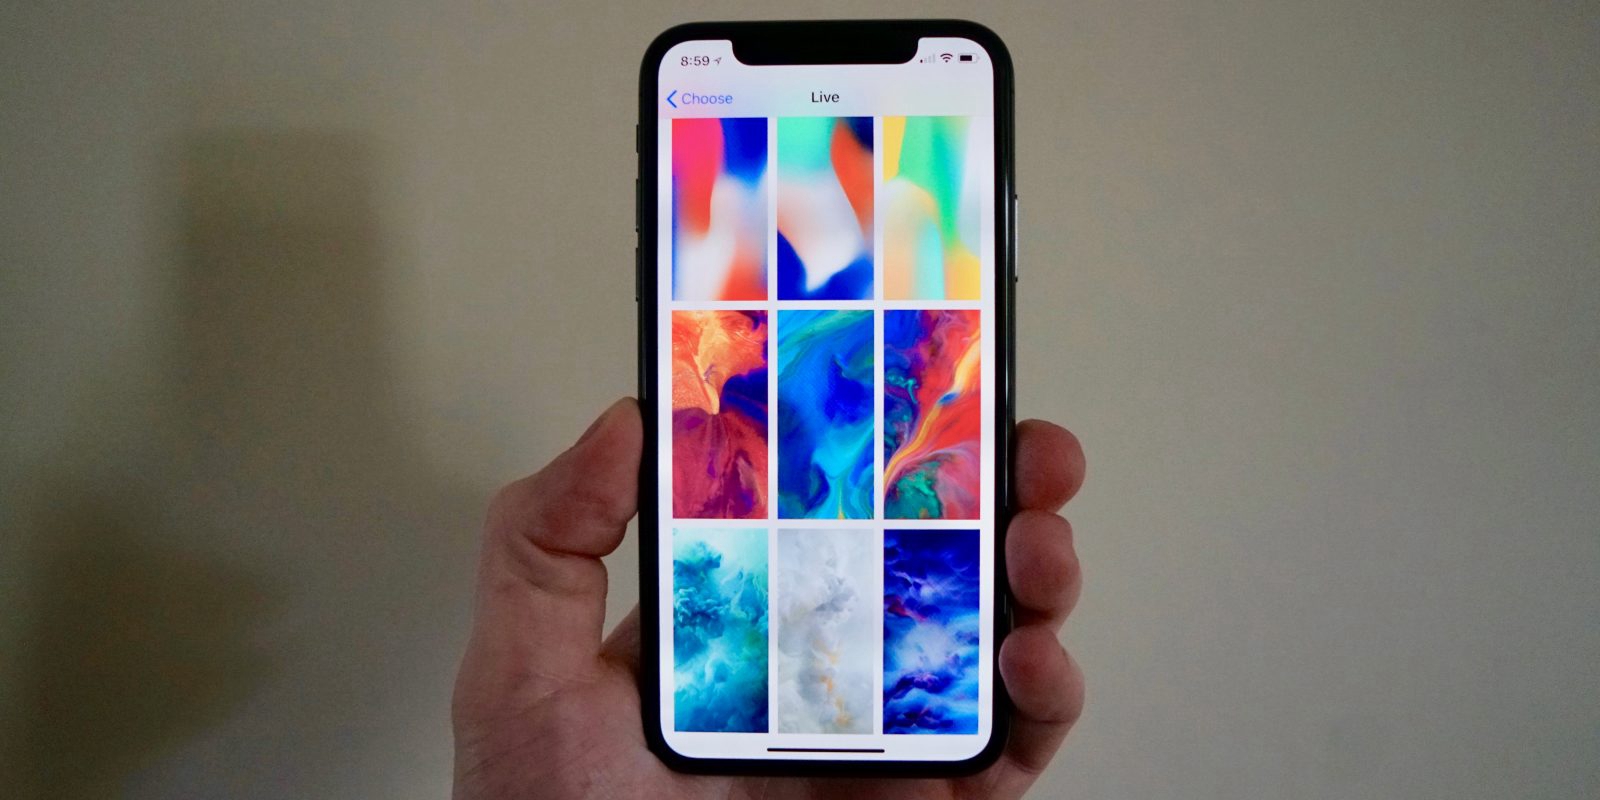 Download New iPhone X Wallpapers From iOS 11.2